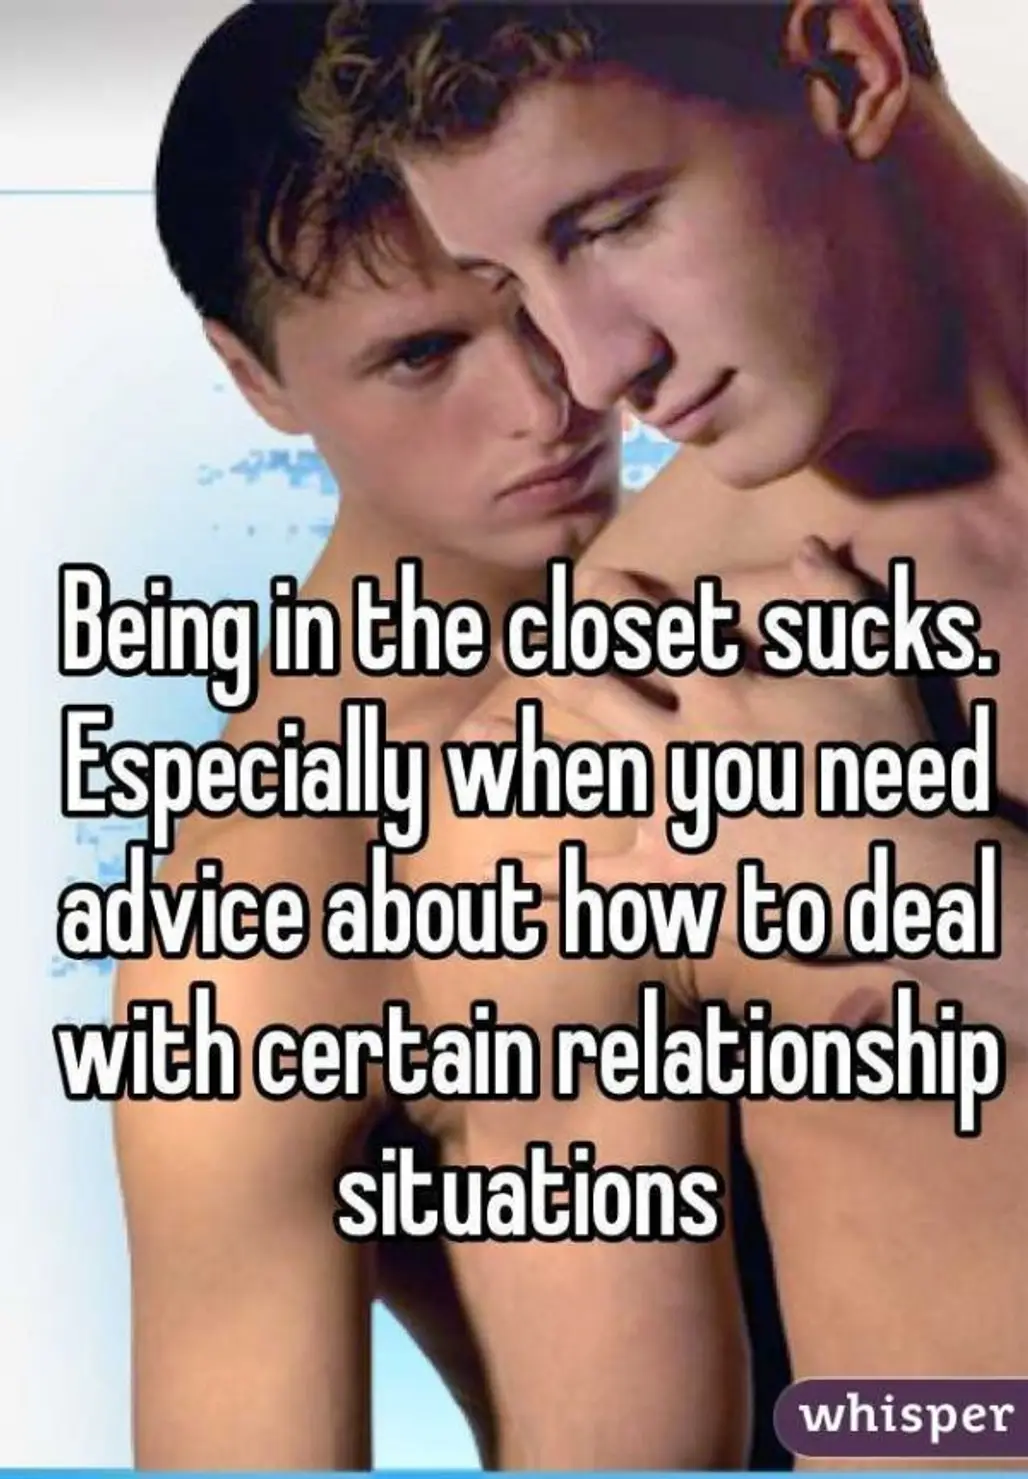 You Can't Even Get Advice about Your Relationship